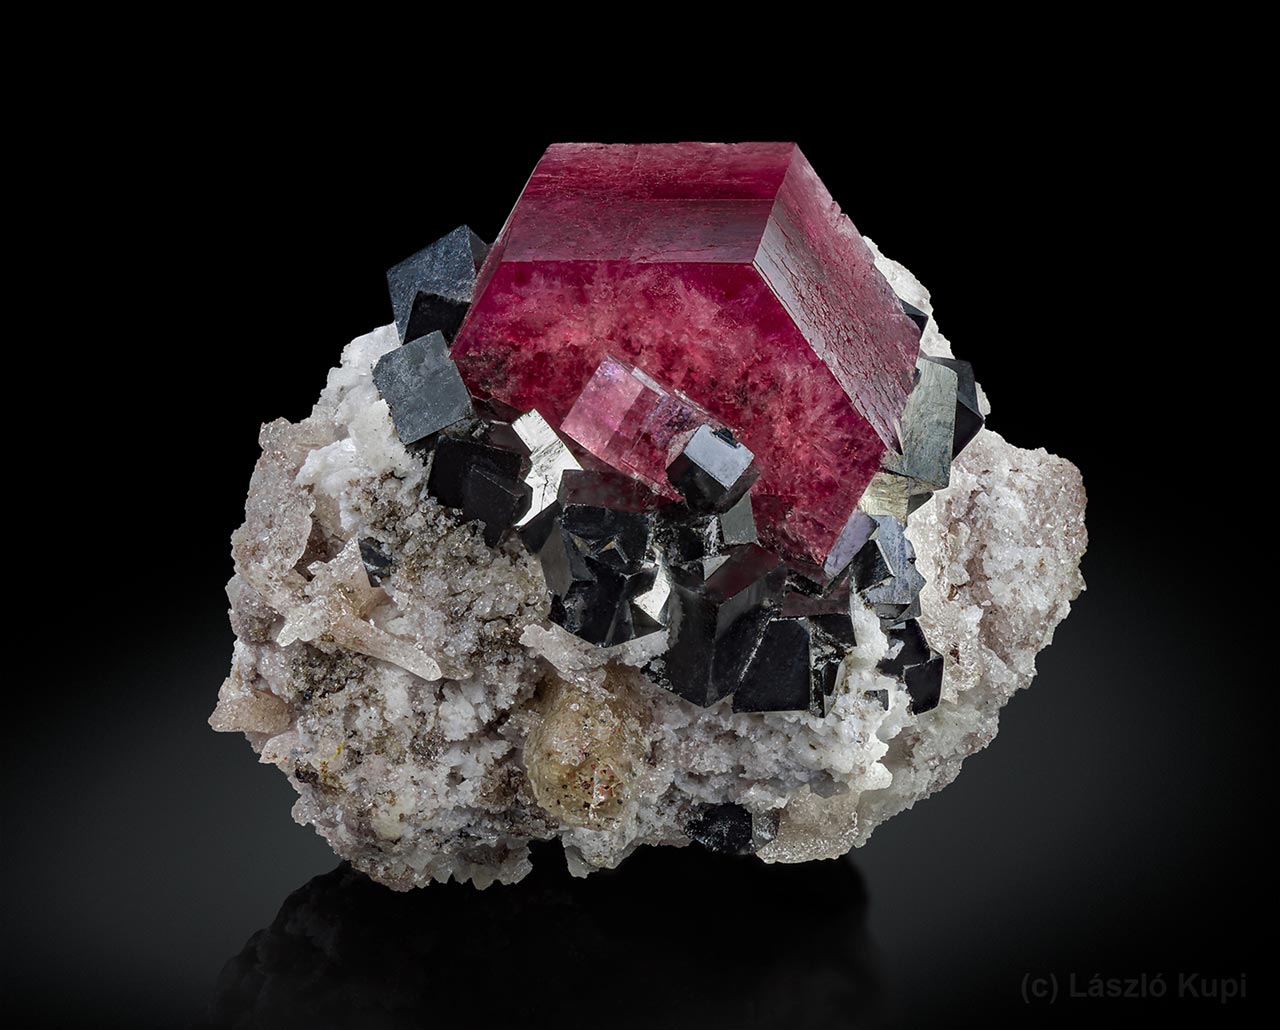 Excellent red beryl (bixbite) crystal with black bixbyite crystals and pale topaz from Searl Canyon, Red Beryl Claim, Juab Co., Utah, USA